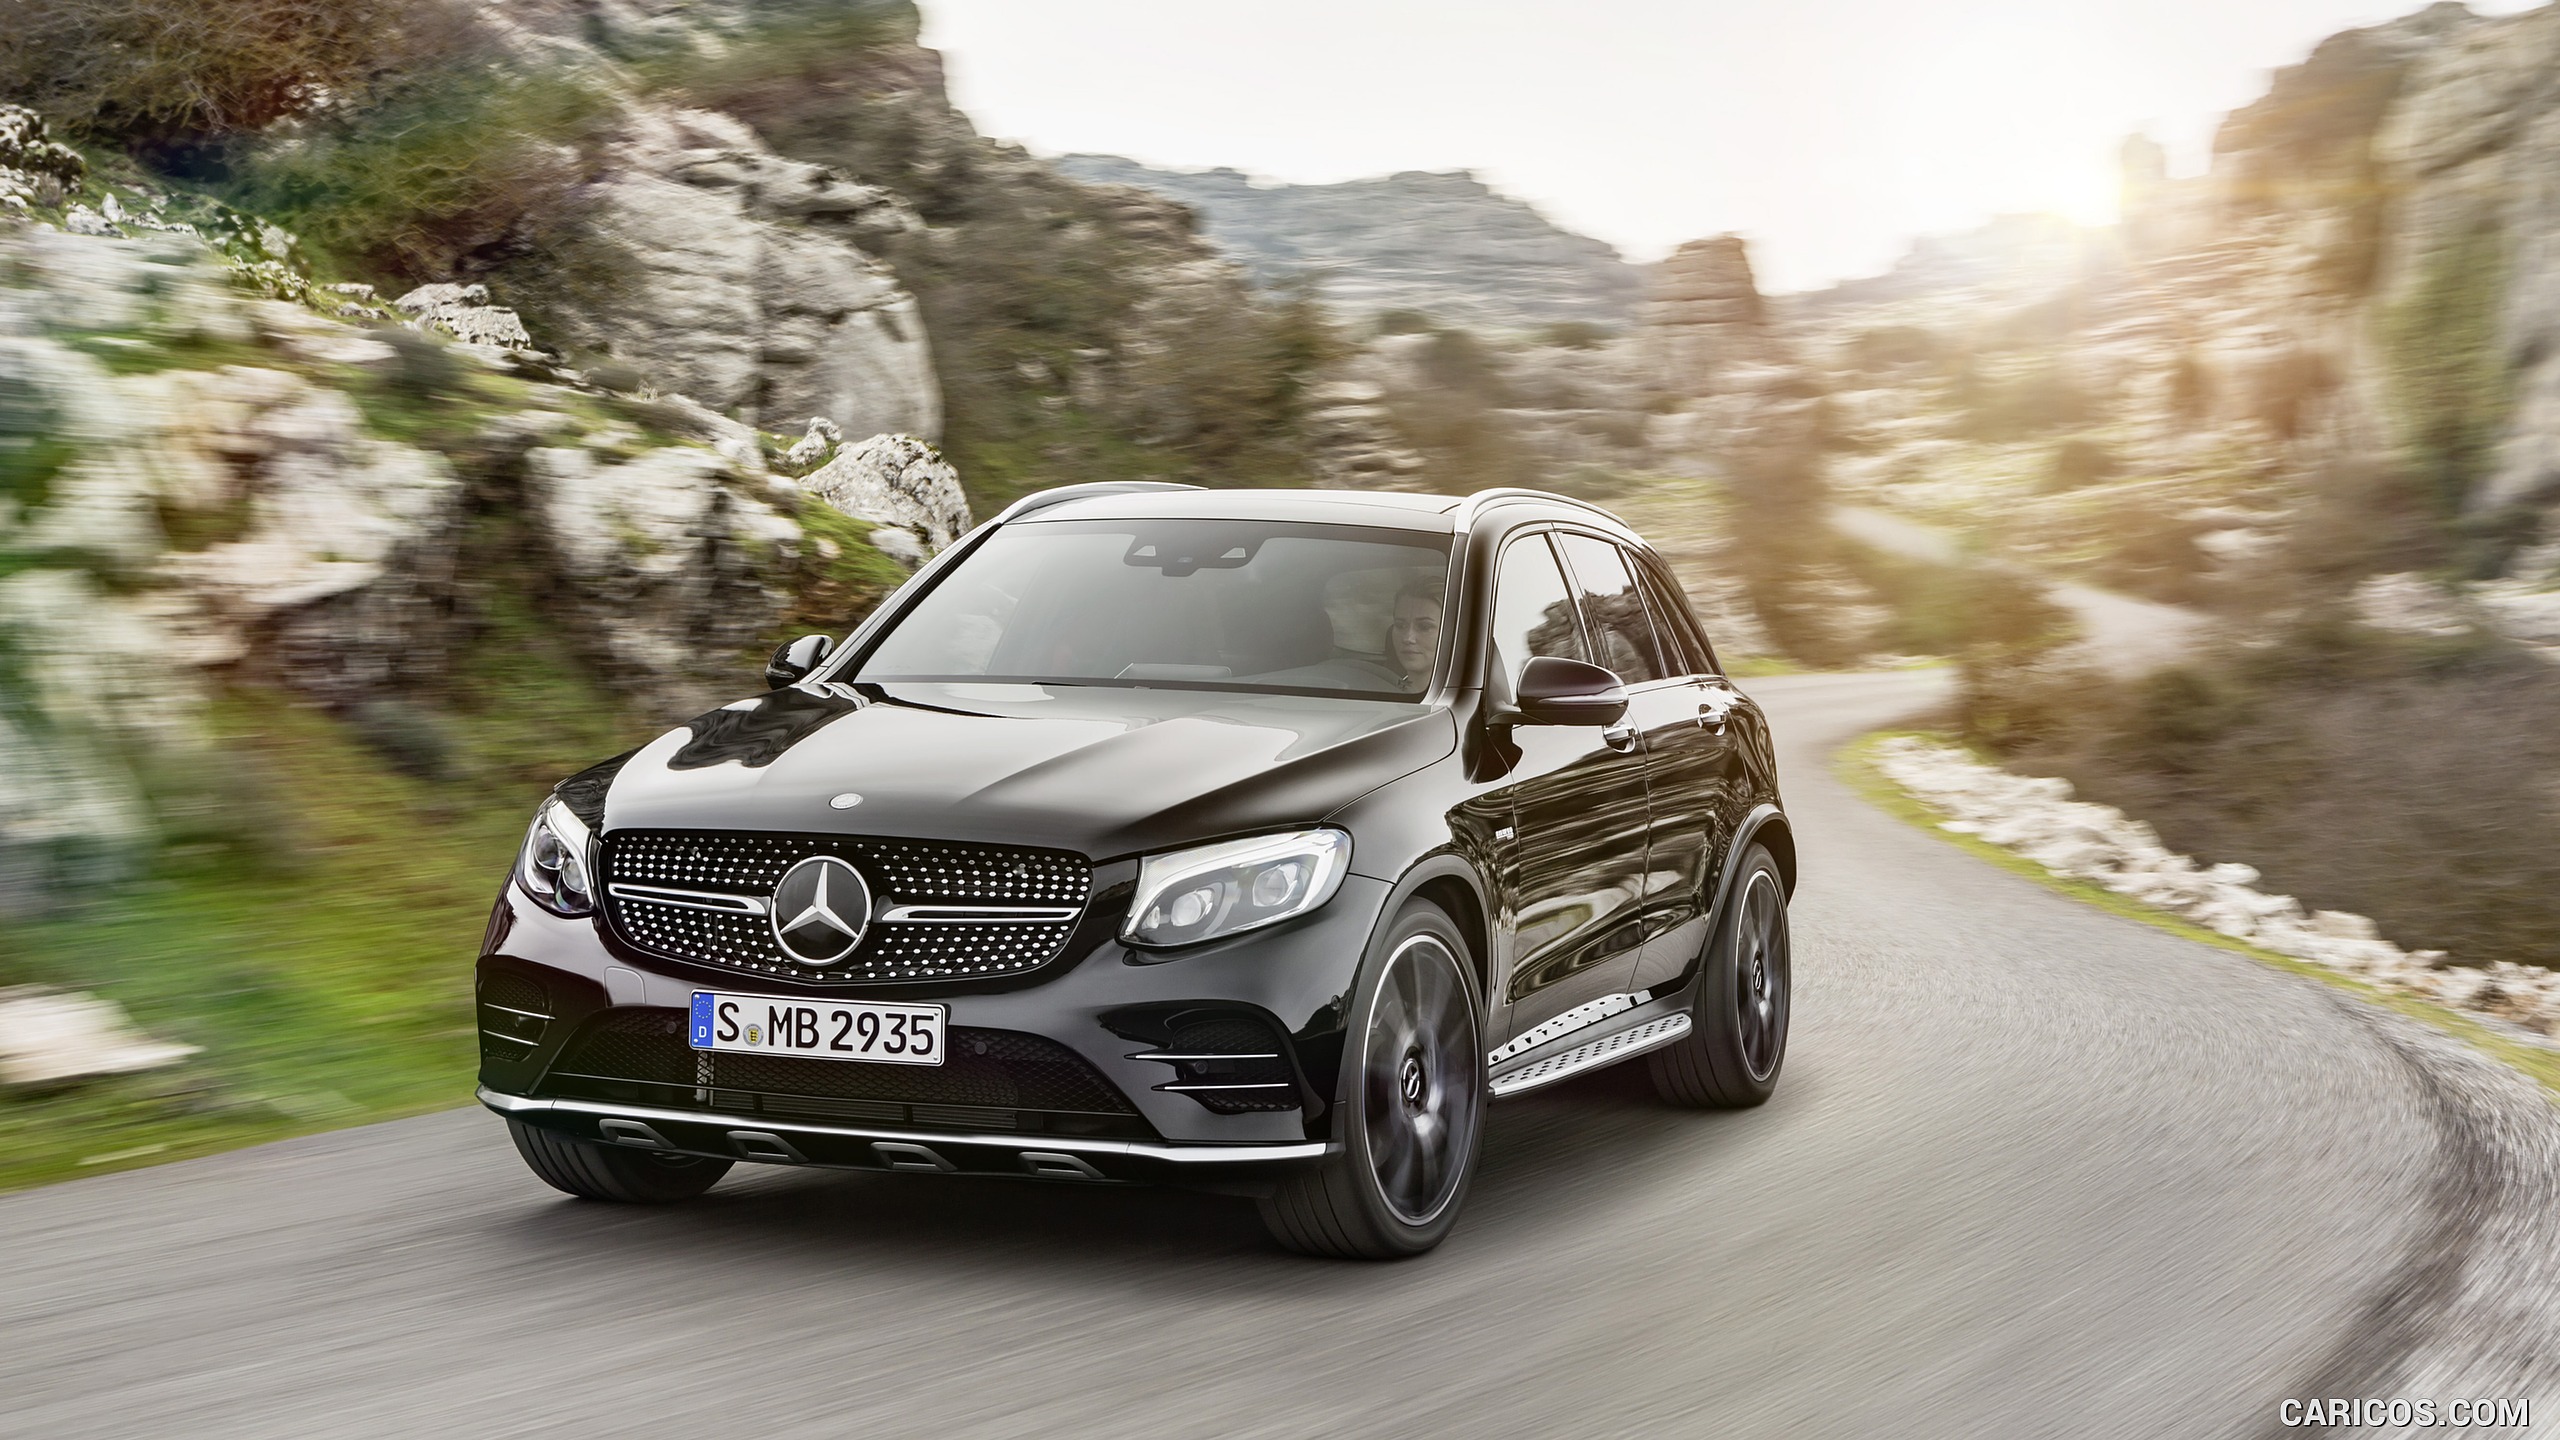 2017 Mercedes-AMG GLC 43 4MATIC (Chassis: X253, Color: Obsidian Black) - Front, #6 of 108